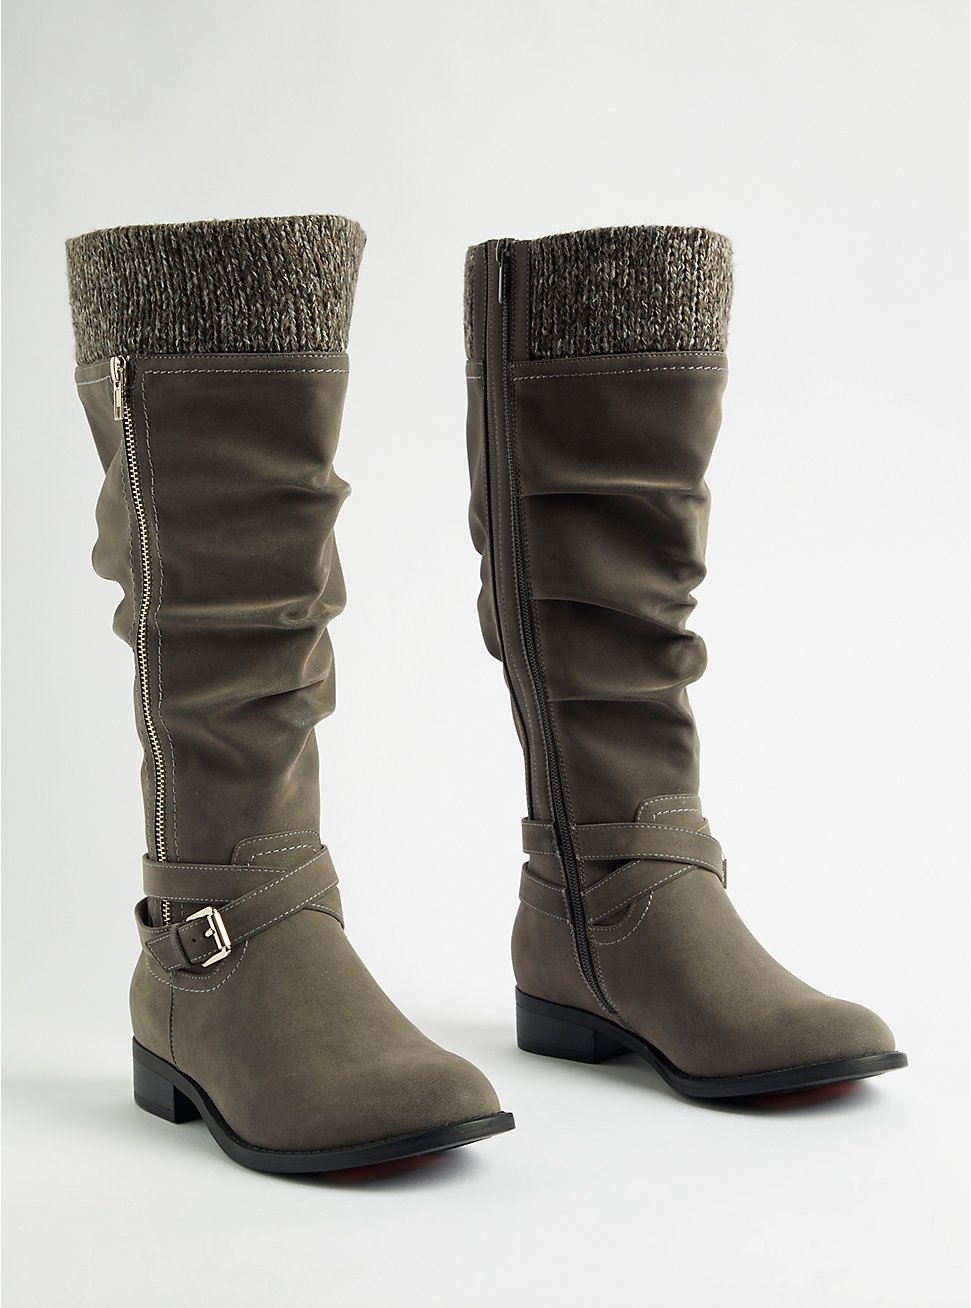 Plus Size Sweater Knee Boot - Oil Suede Grey (WW), GREY, hi-res